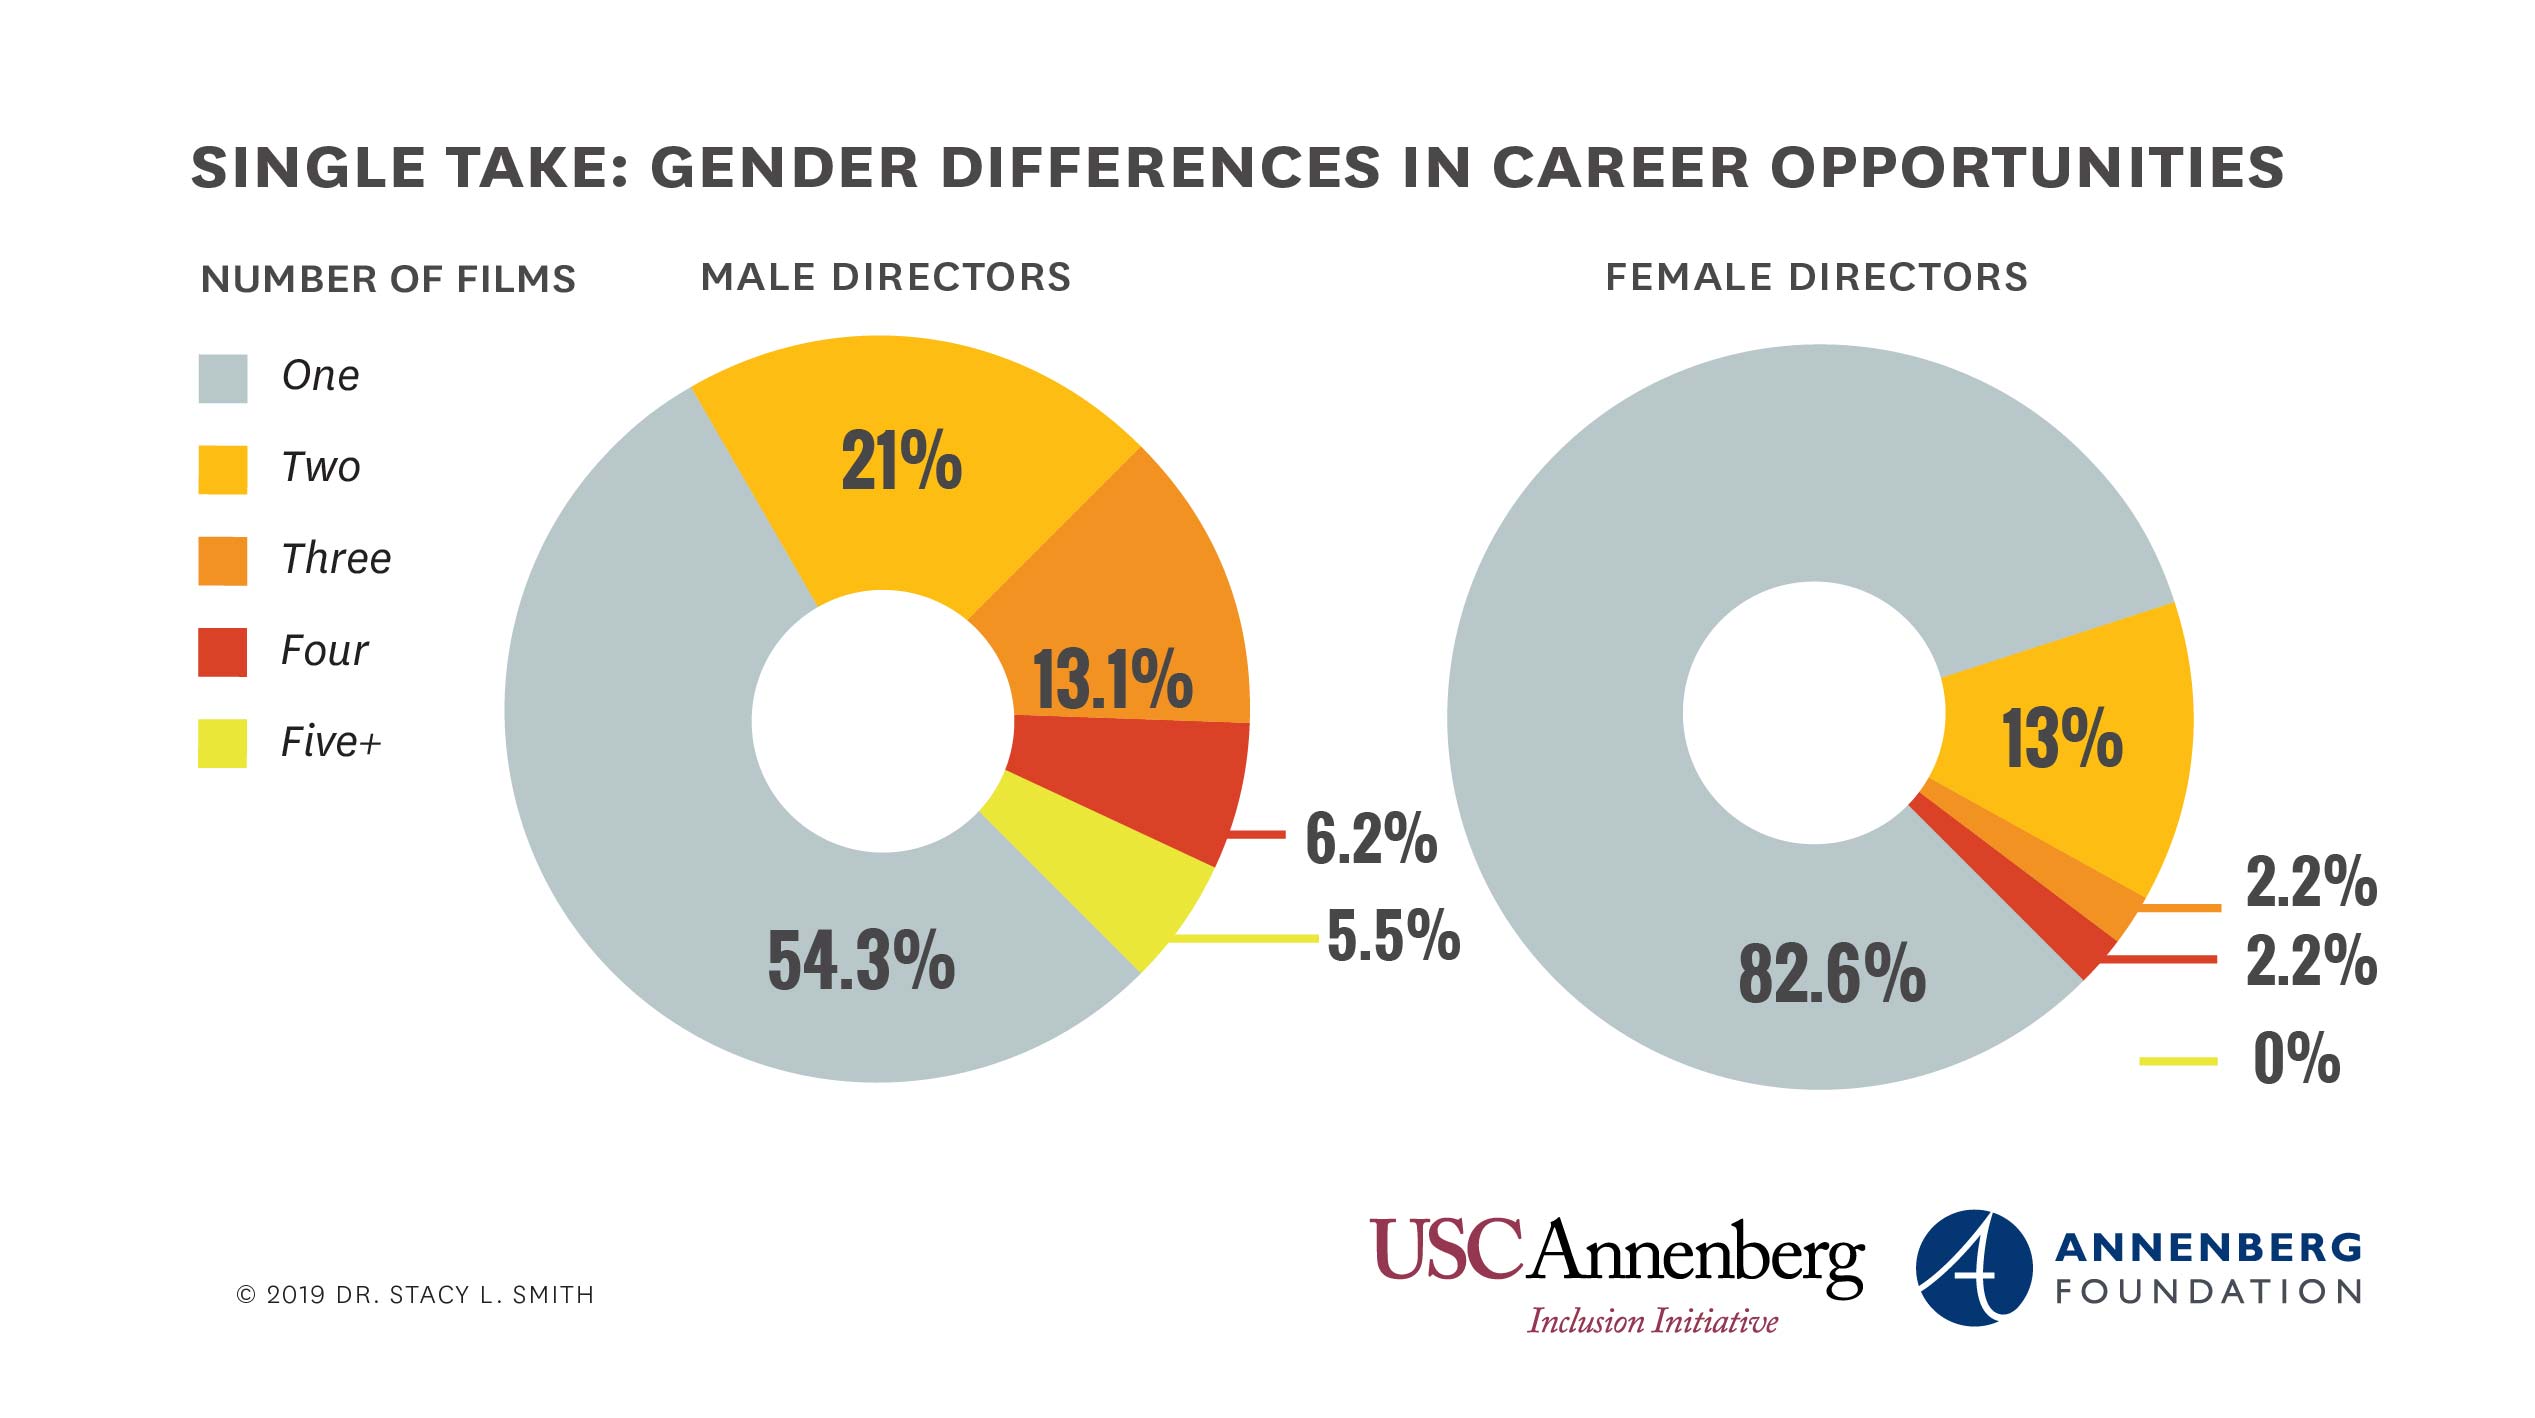 Annenberg Inclusion Initiative breaks down the differences in career opportunities for male and female directors (USC Annenberg Inclusion Initiative)